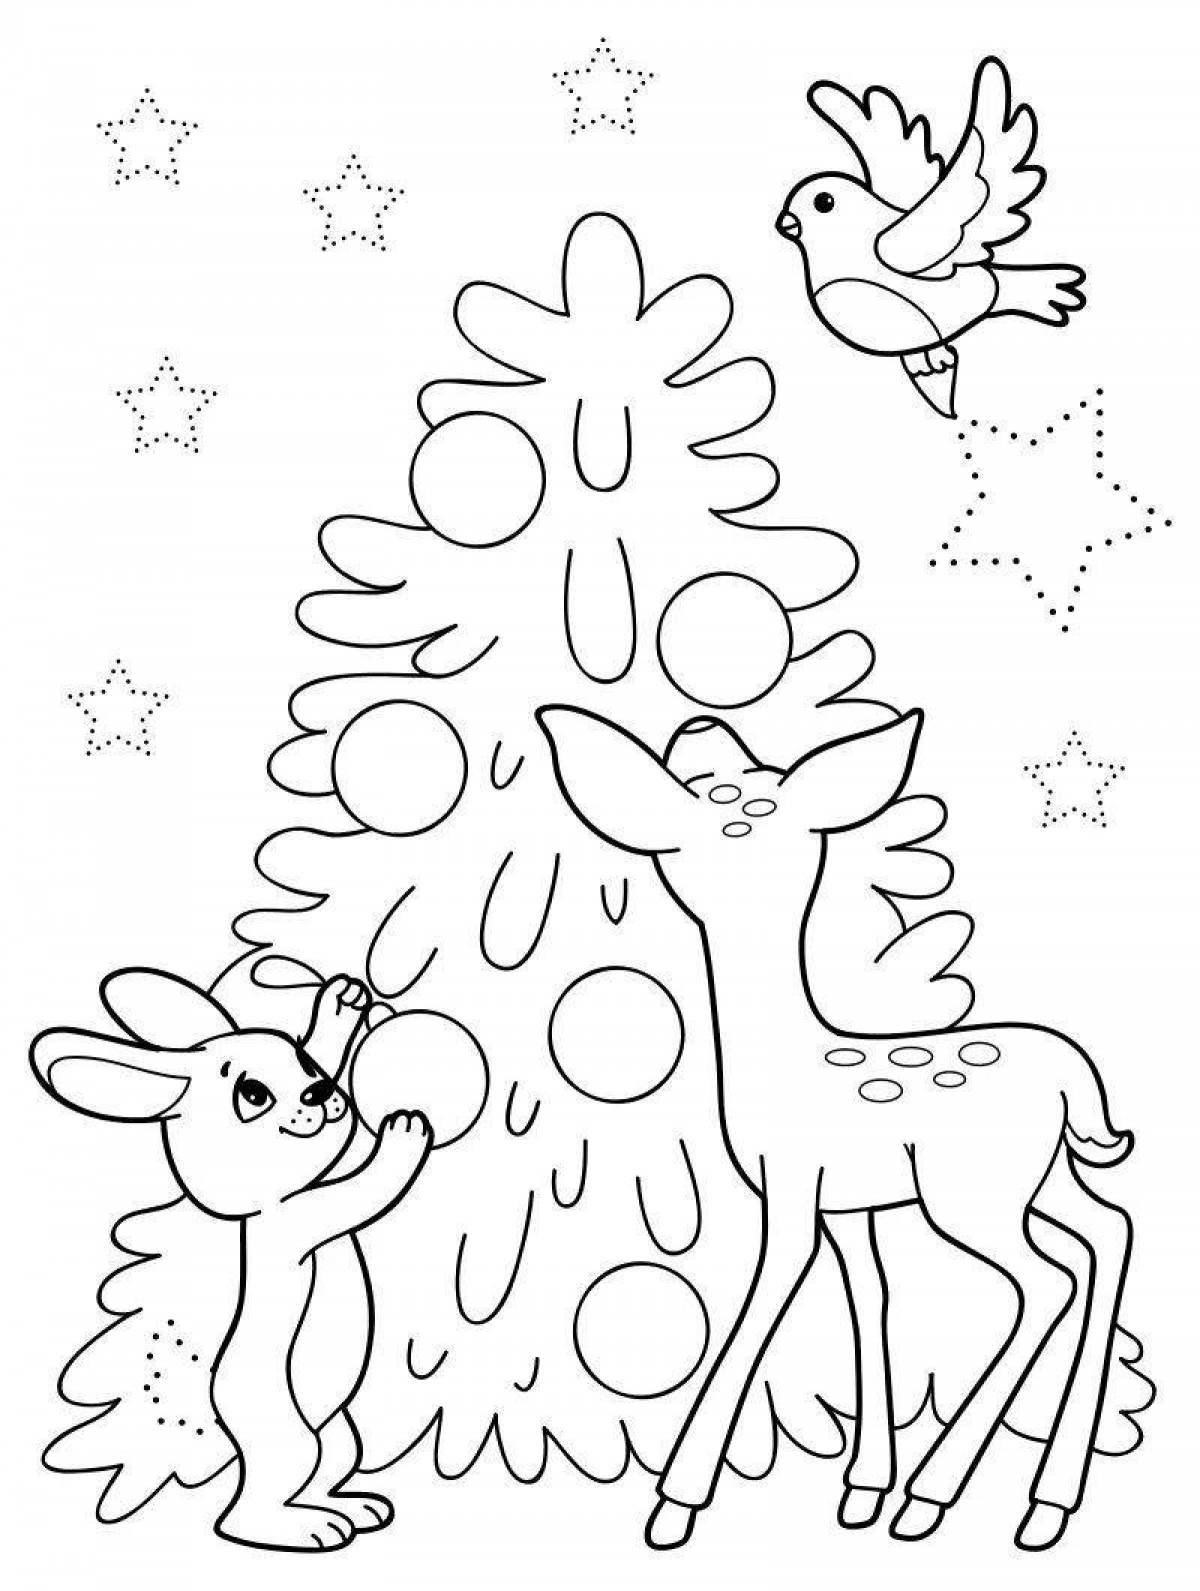 Fancy hare and tree coloring page